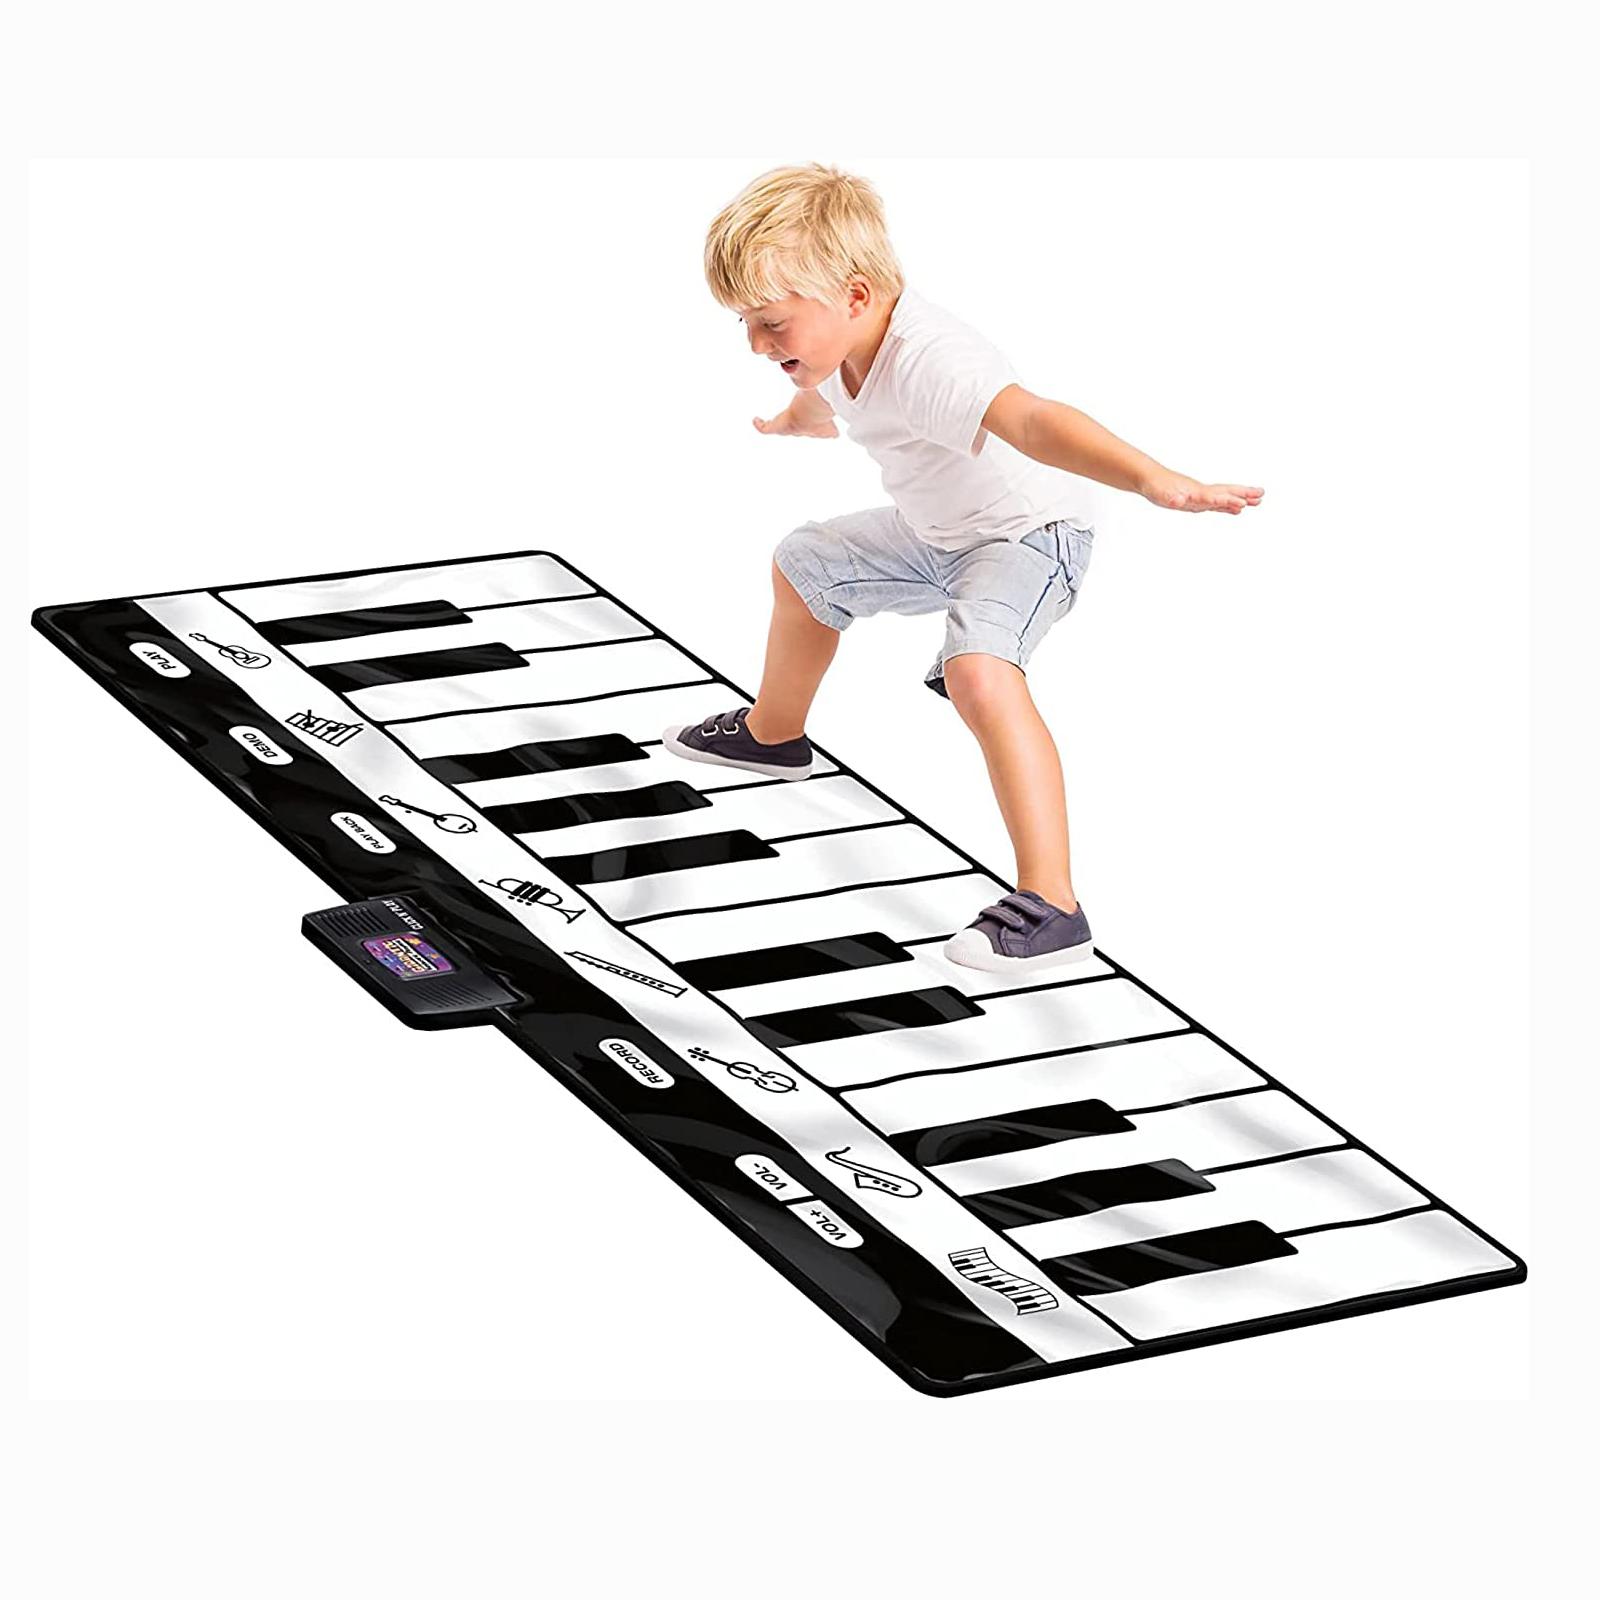 FourAll-Toys, Kids & Baby Kids Piano Mat with 24 Keys, 4 Unique Play Modes,8 Musical Instrument Sounds Music Mat Keyboard Toys Musical Toys Floor Piano Pad Gift for Toddlers